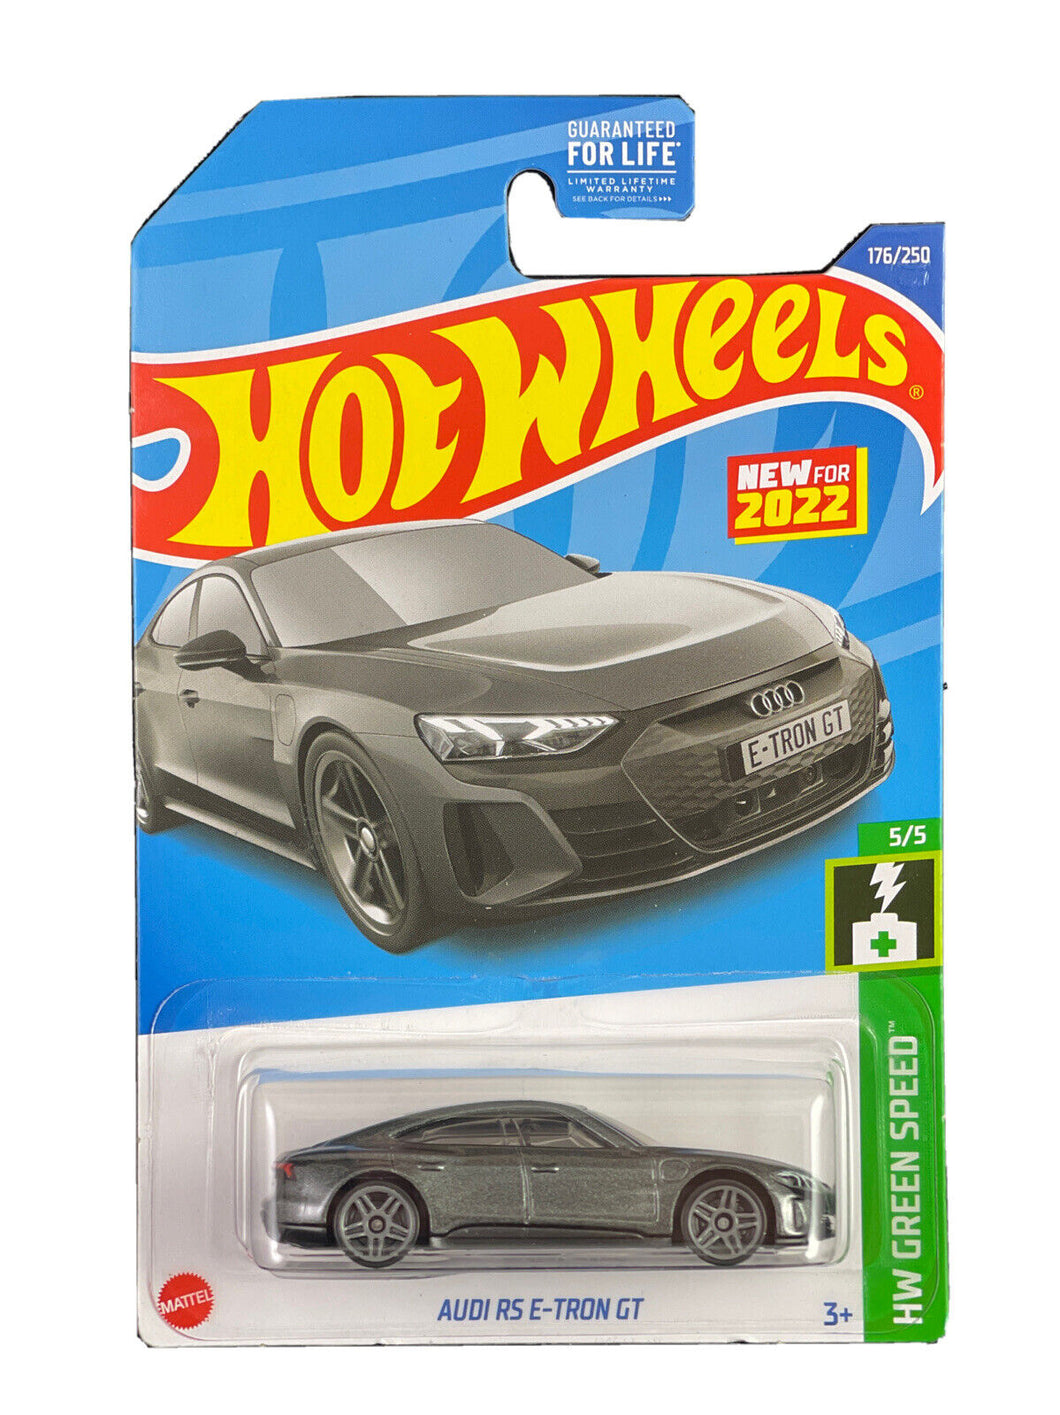 Hot Wheels Audi RS e-tron GT HW Green Speed 5/5 176/250 - Assorted Color